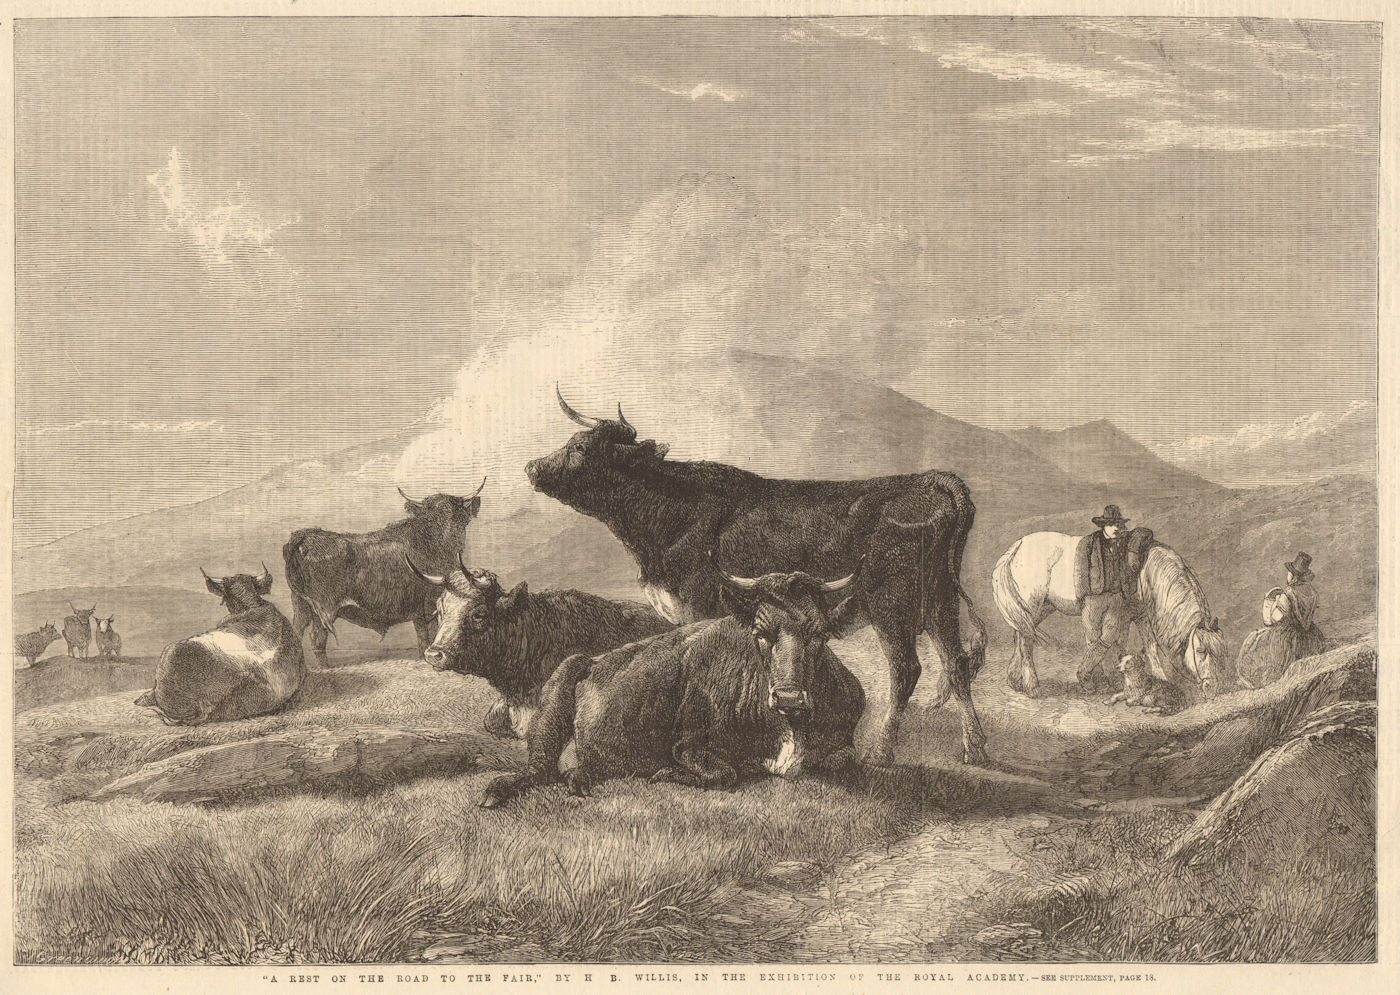 Associate Product "A rest on the road to the fair "by H. B. Willis. Cattle. Fine arts 1861 print